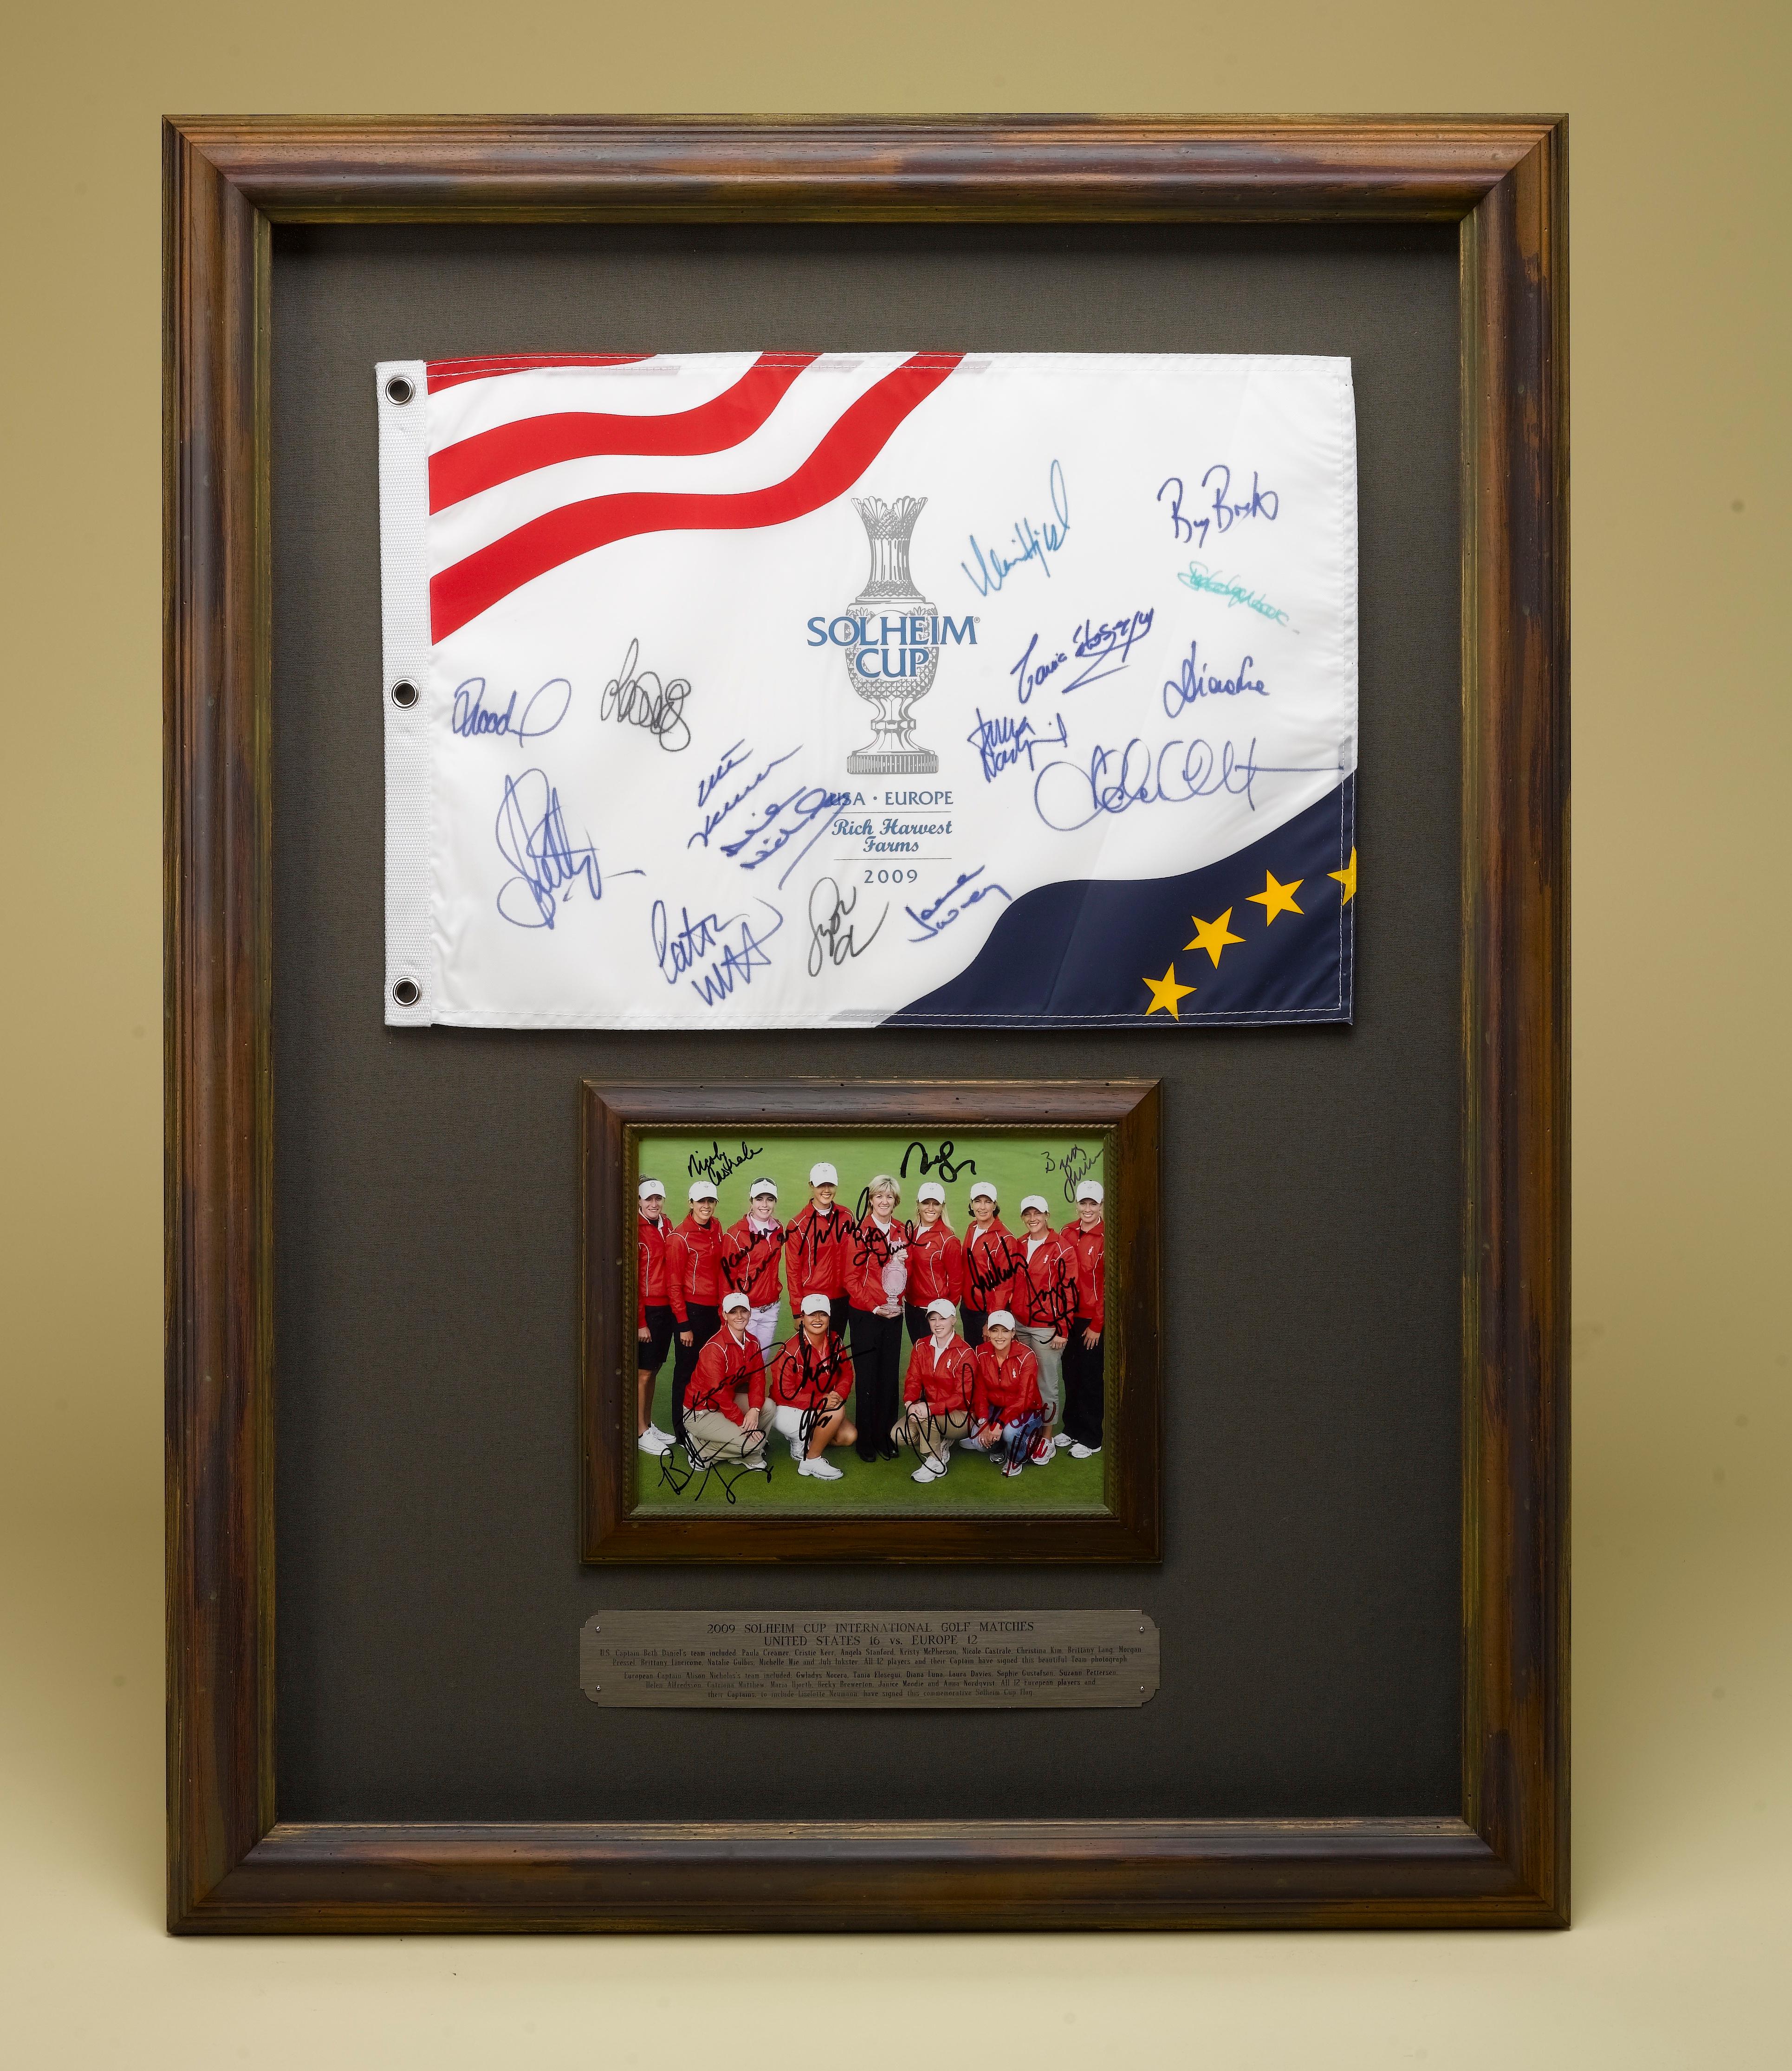 Contemporary Solheim Cup Matches U.S. & European Team Signed Photo & Flag, 2009 For Sale